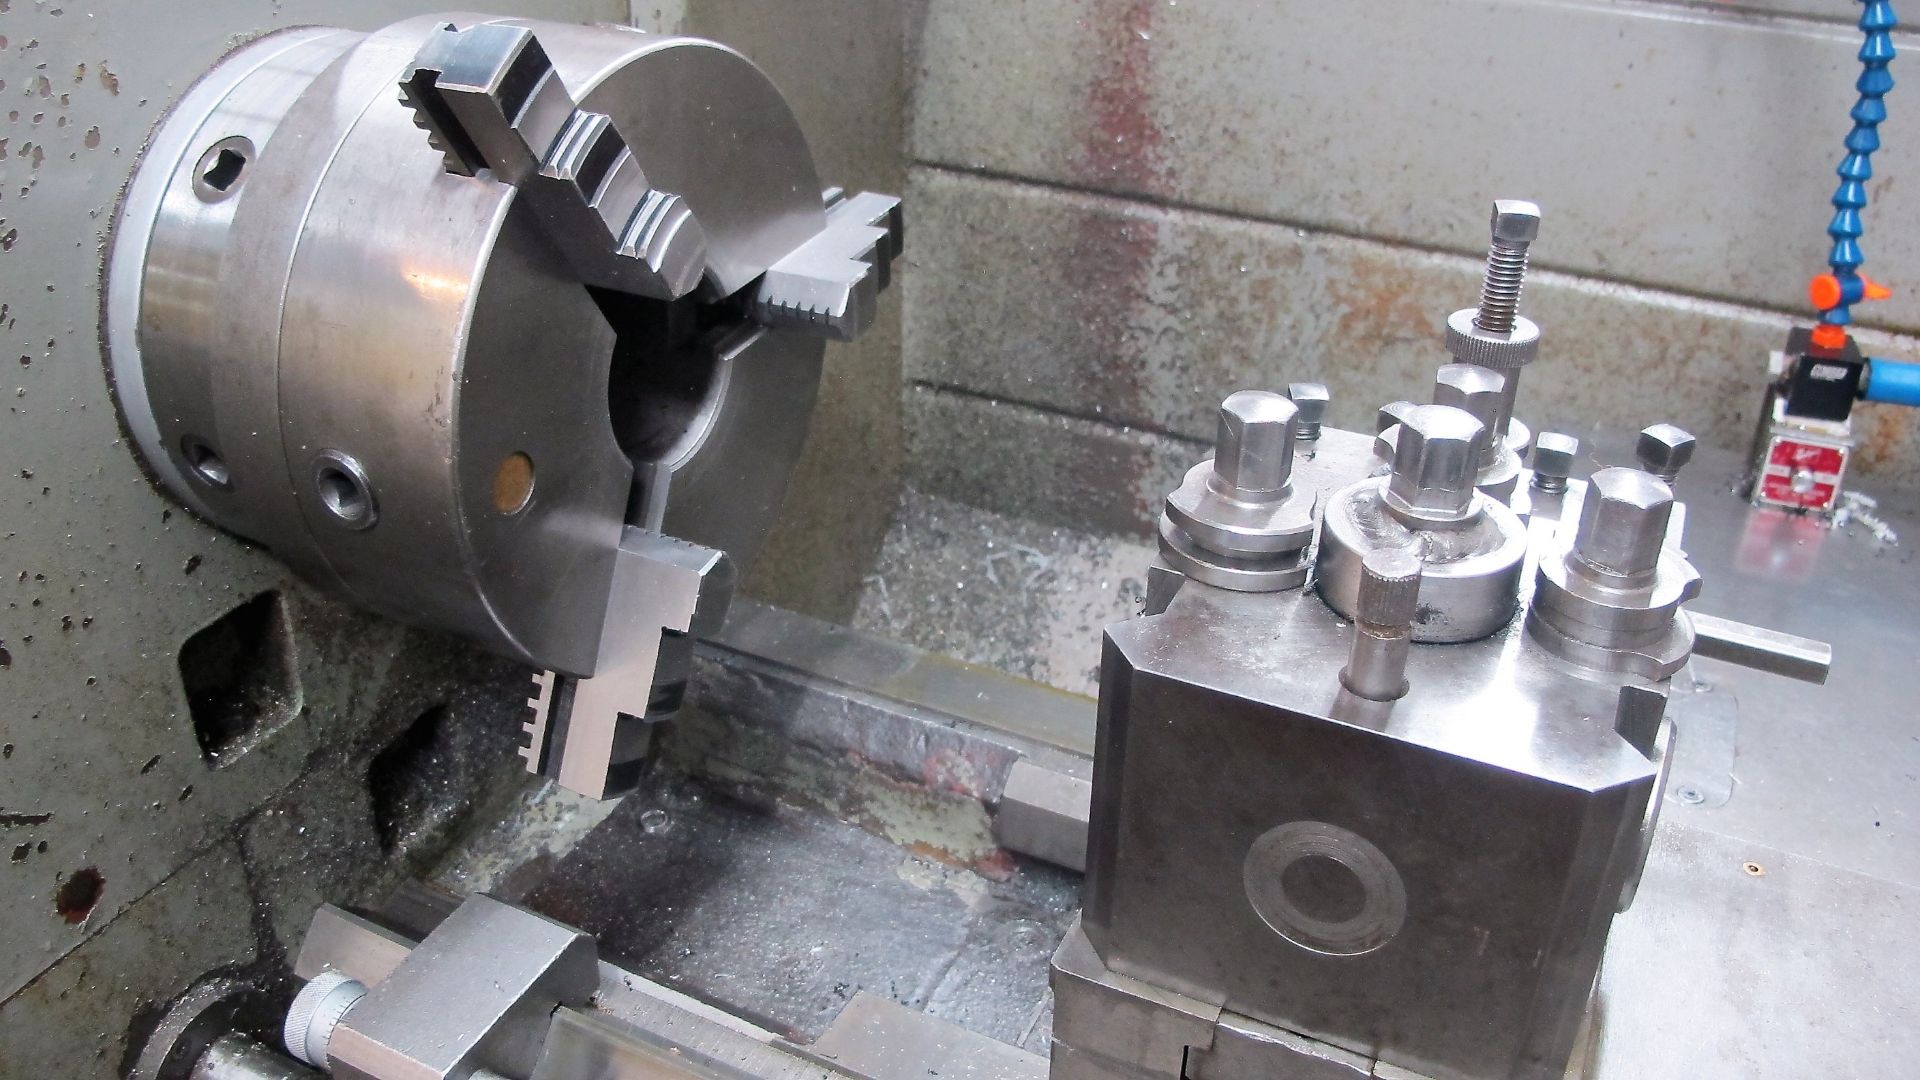 ACRA TURN 1764T, 3 PHASE LATHE W/64" X 17" BED, 10" 3 JAW CHUCK, 18" SWING X 64" BETWEEN CENTERS, - Image 3 of 7